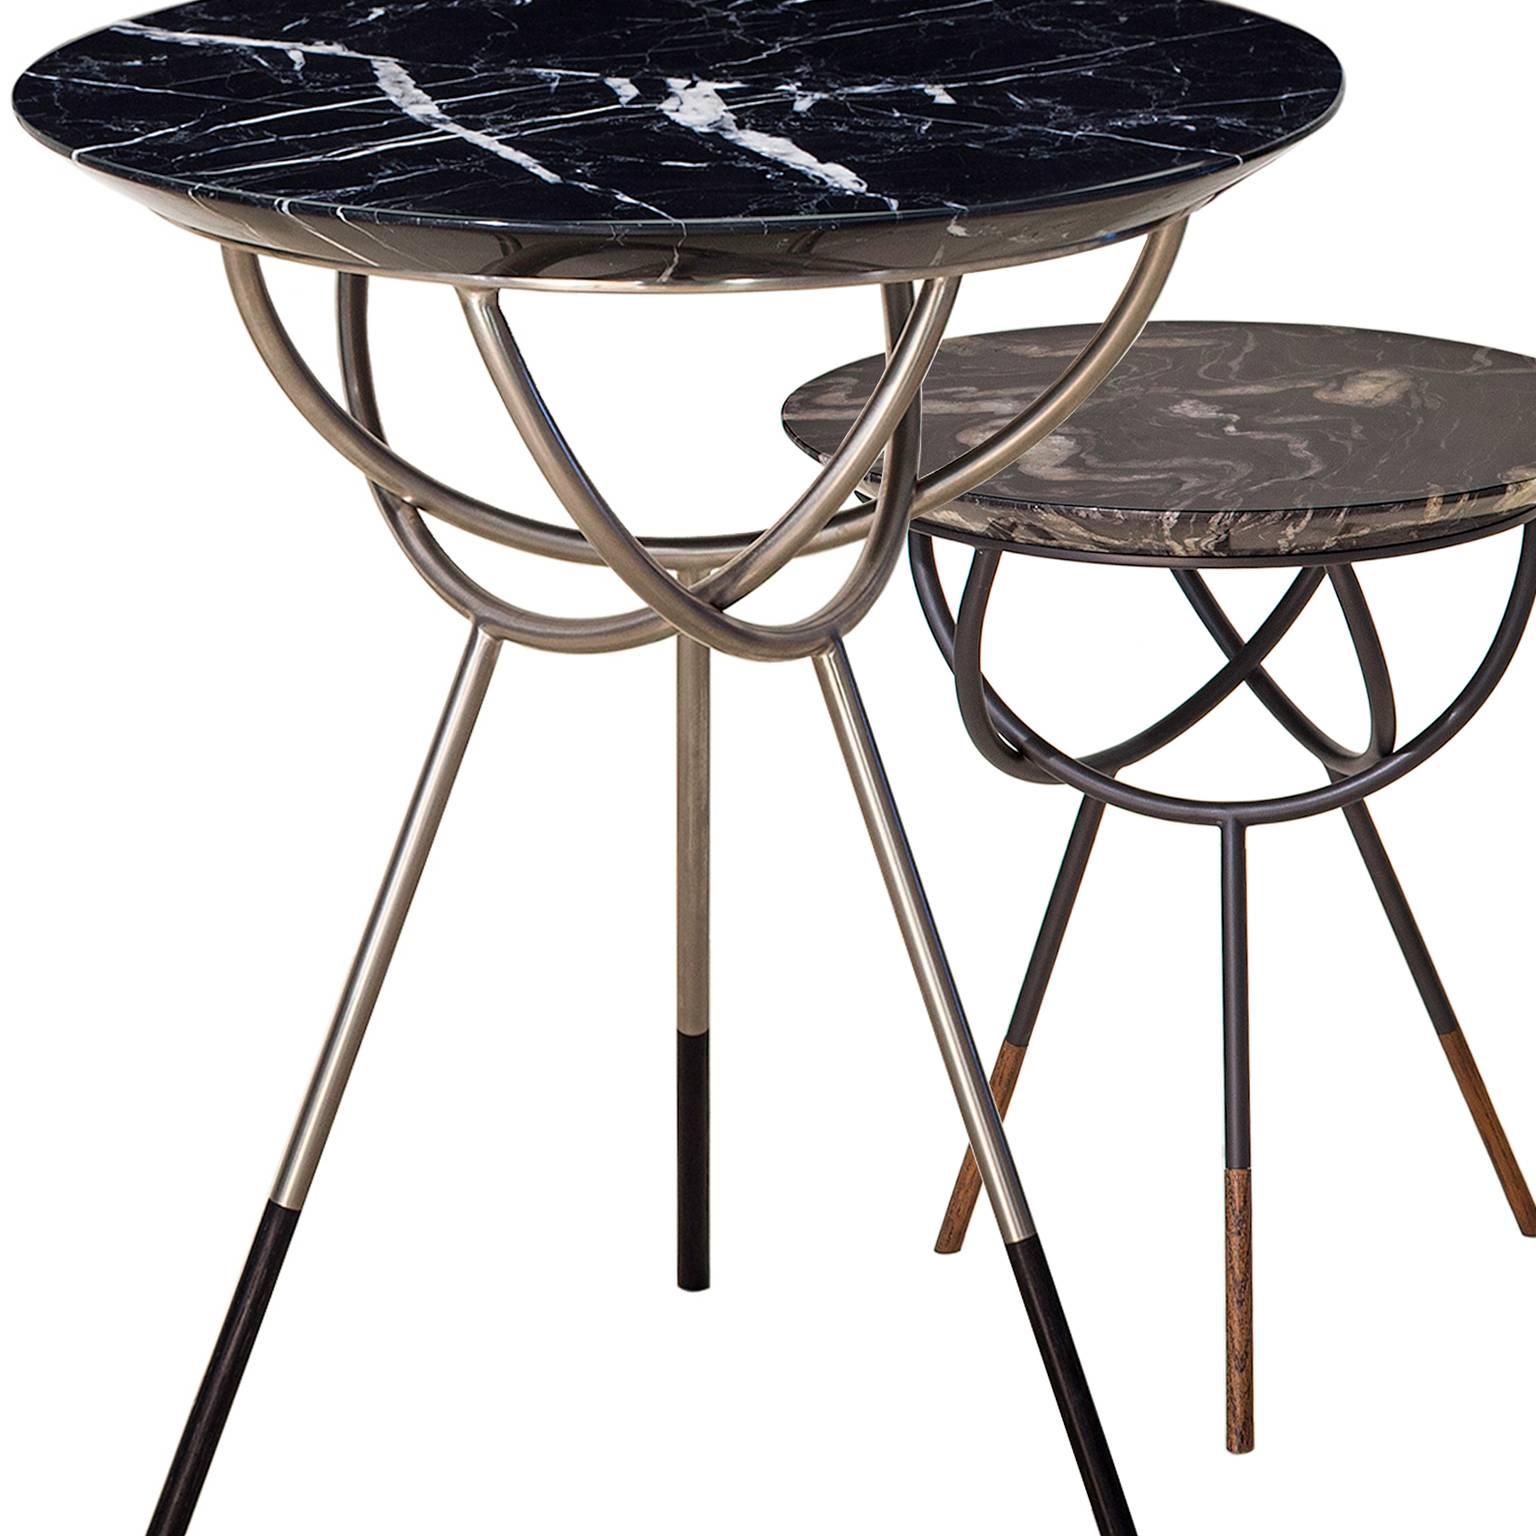 Atlas Satin Nickel Side Table with Black Marble Top by AVRAM RUSU STUDIO In New Condition For Sale In Brooklyn, NY